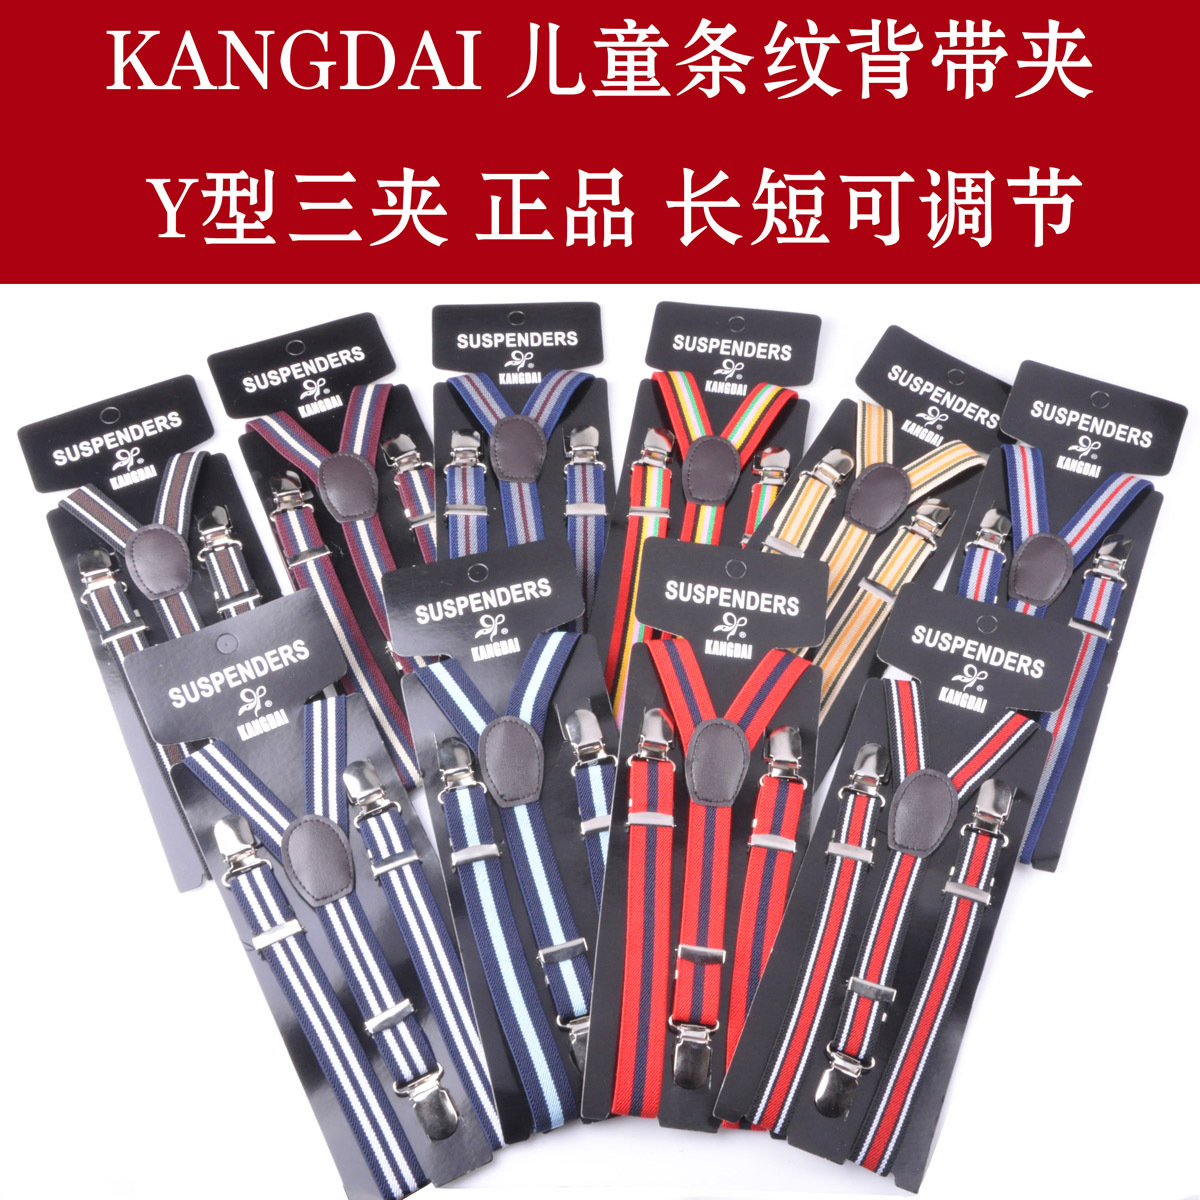 Free Shipping Kangdai child suspenders male general b7 clip suspenders clip stripe